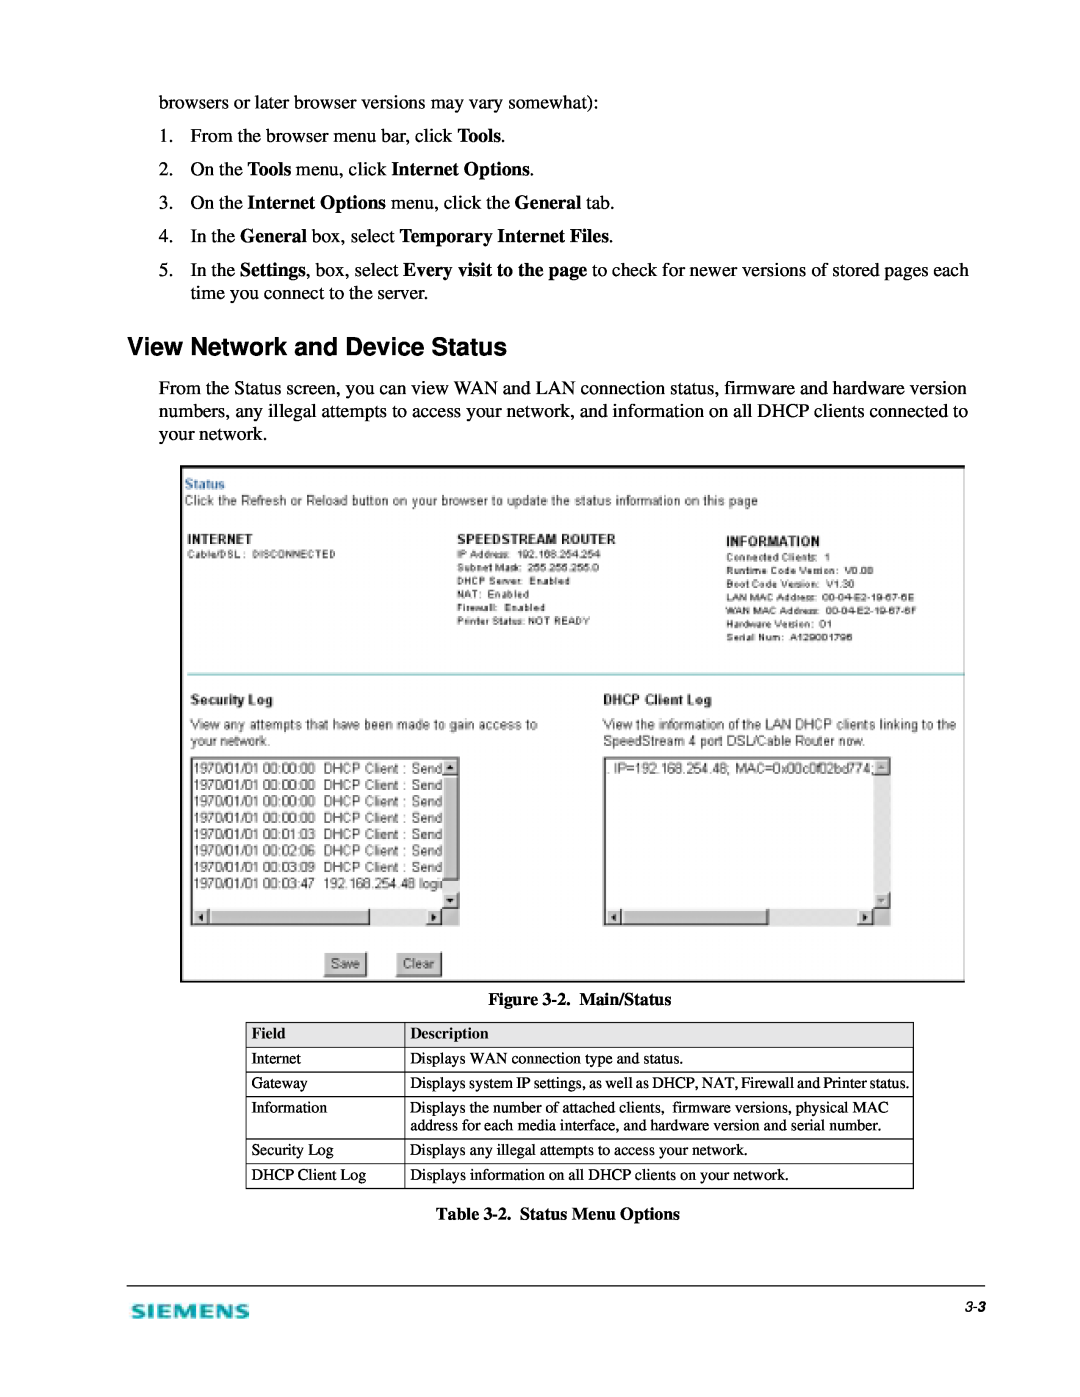 Siemens 2602 manual View Network and Device Status, On the Tools menu, click Internet Options 